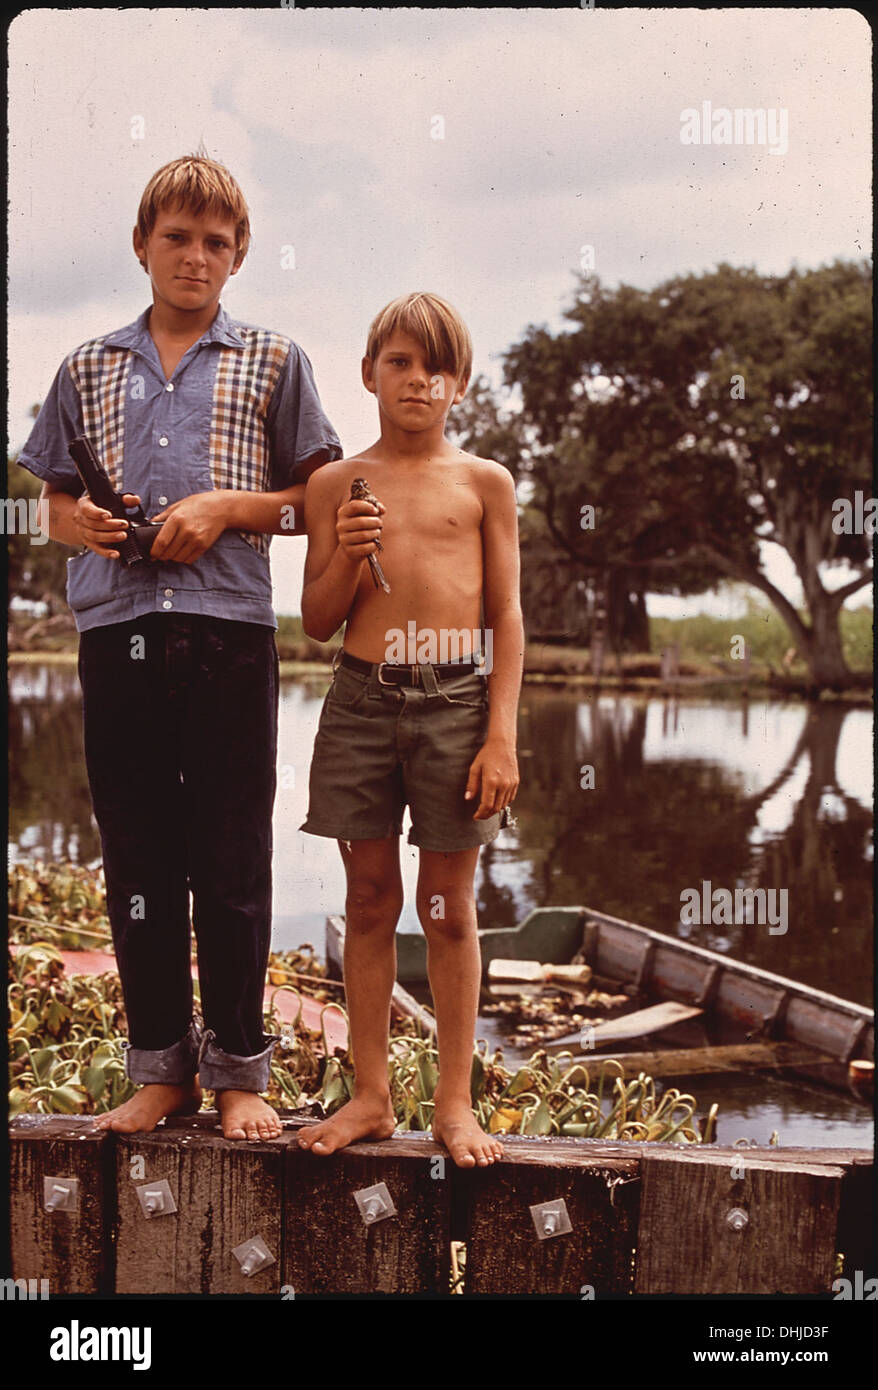 BOYS WITH AIRGUN AND BIRD. THESE FISHERMEN'S SONS LIVE IN BAYOU GAUCHE, DEEP IN THE WETLANDS OF LOUISIANA 229 Stock Photo